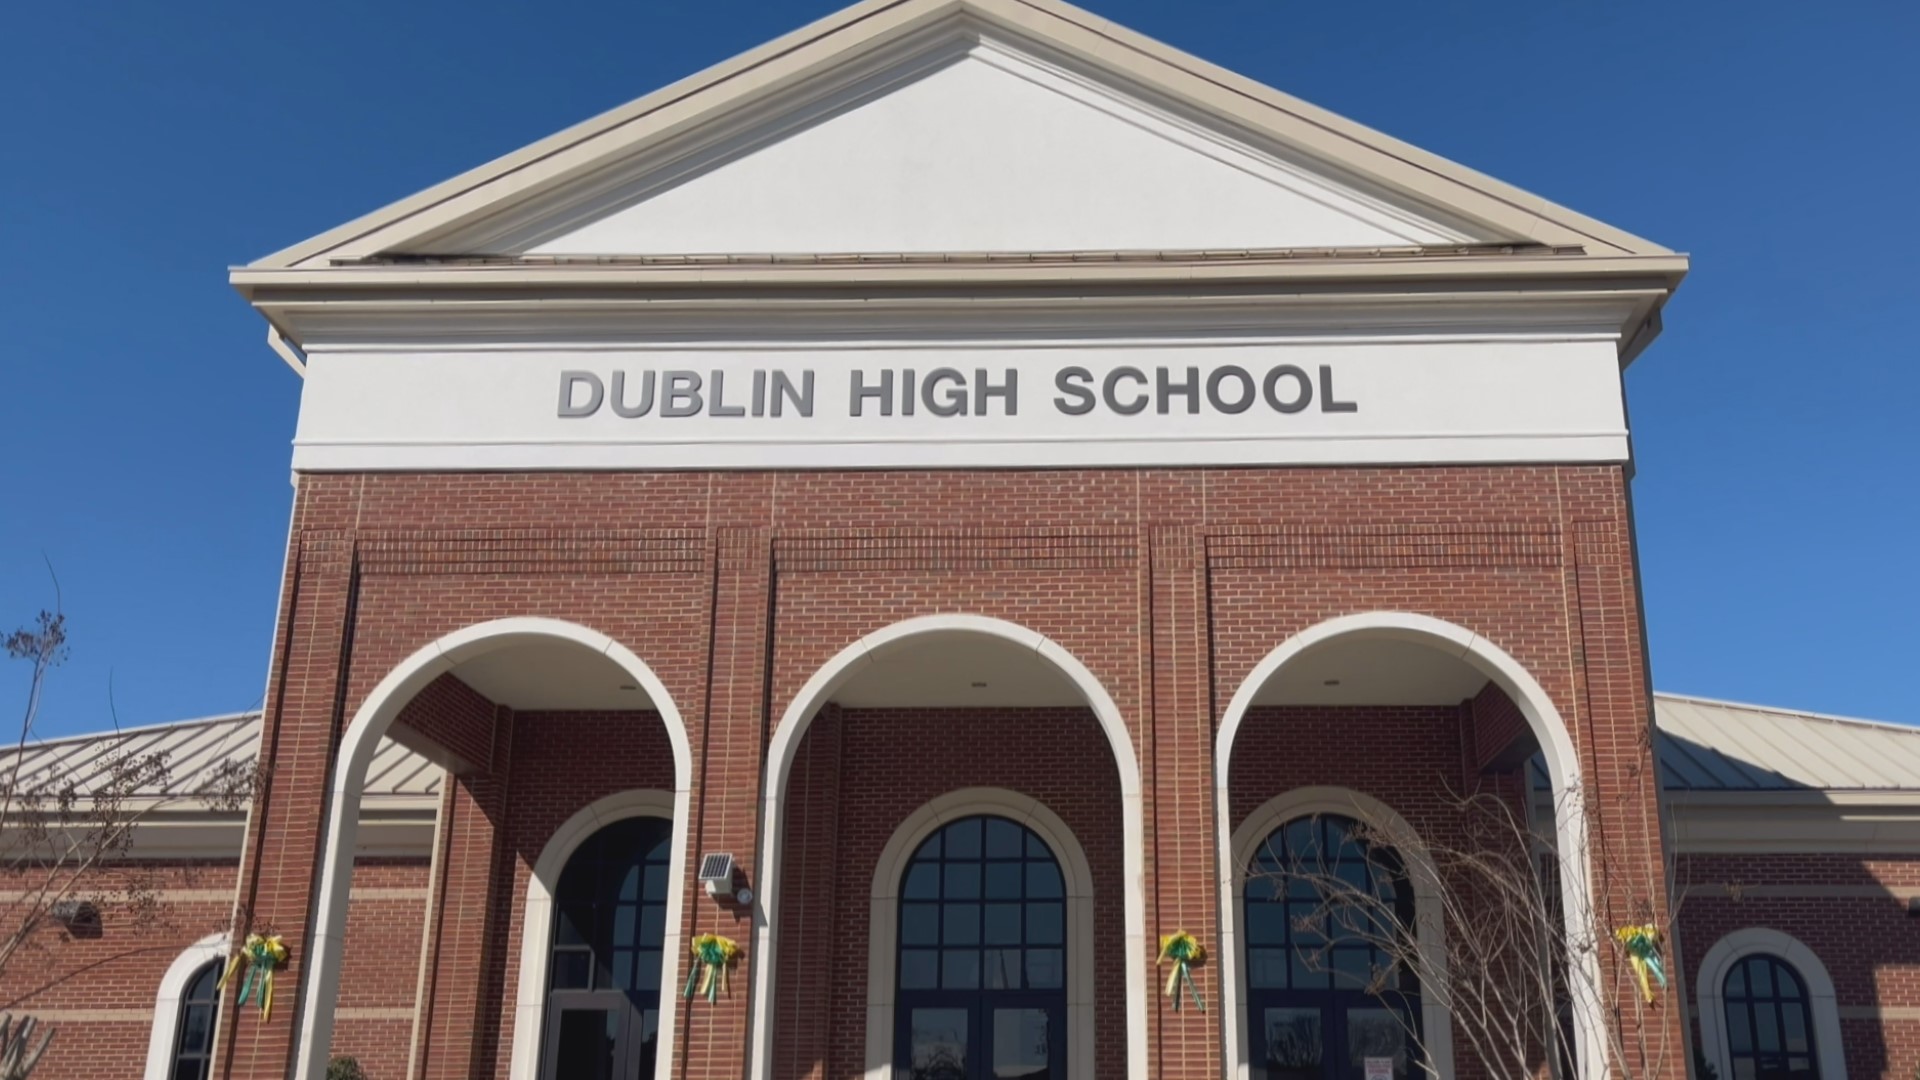 From cosmetology to food science, the students at Dublin High School are training for jobs that are needed in central Georgia